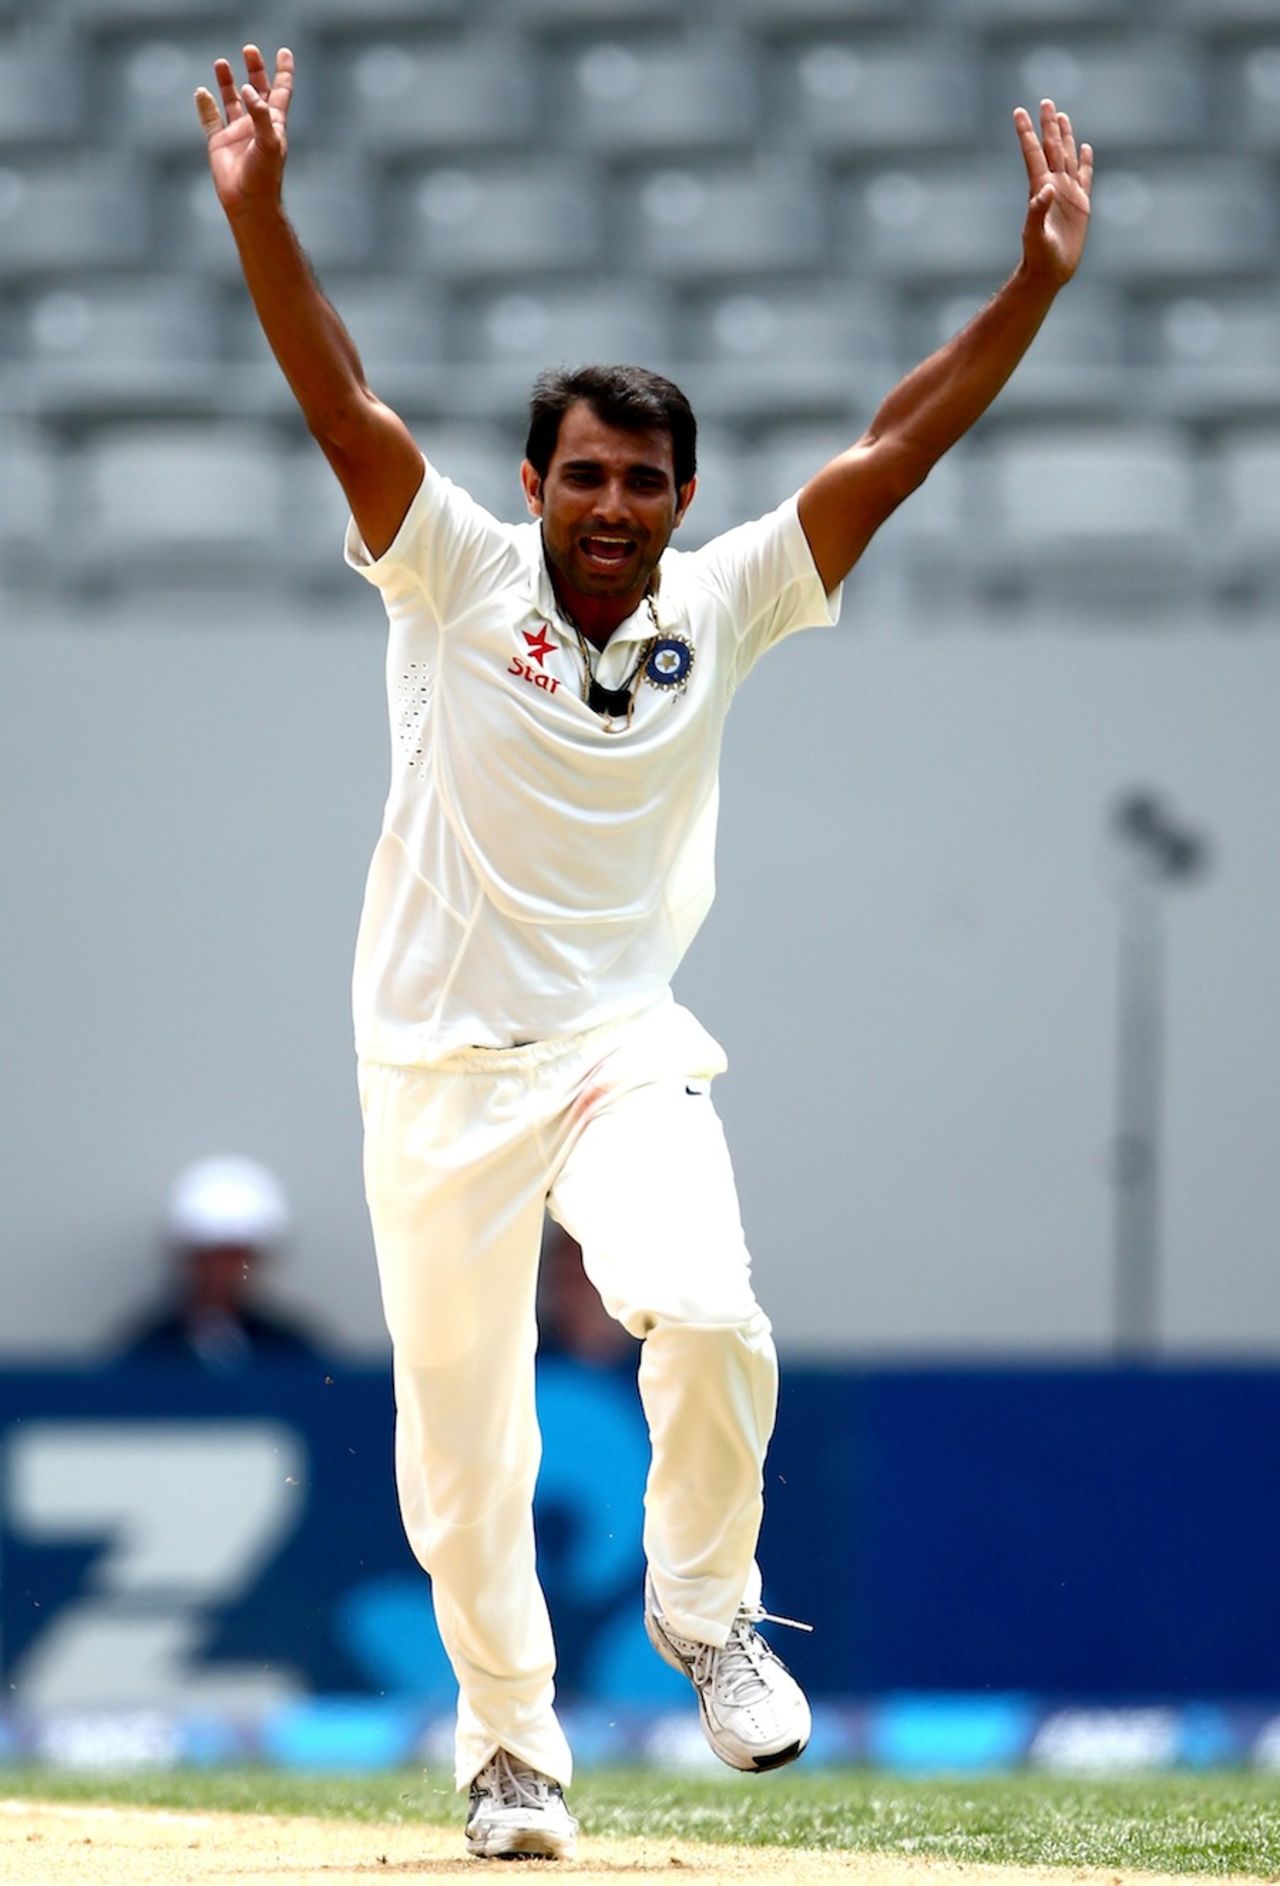 Mohammed Shami dismissed New Zealand's openers, New Zealand v India, 1st Test, Auckland, 3rd day, February 8, 2014